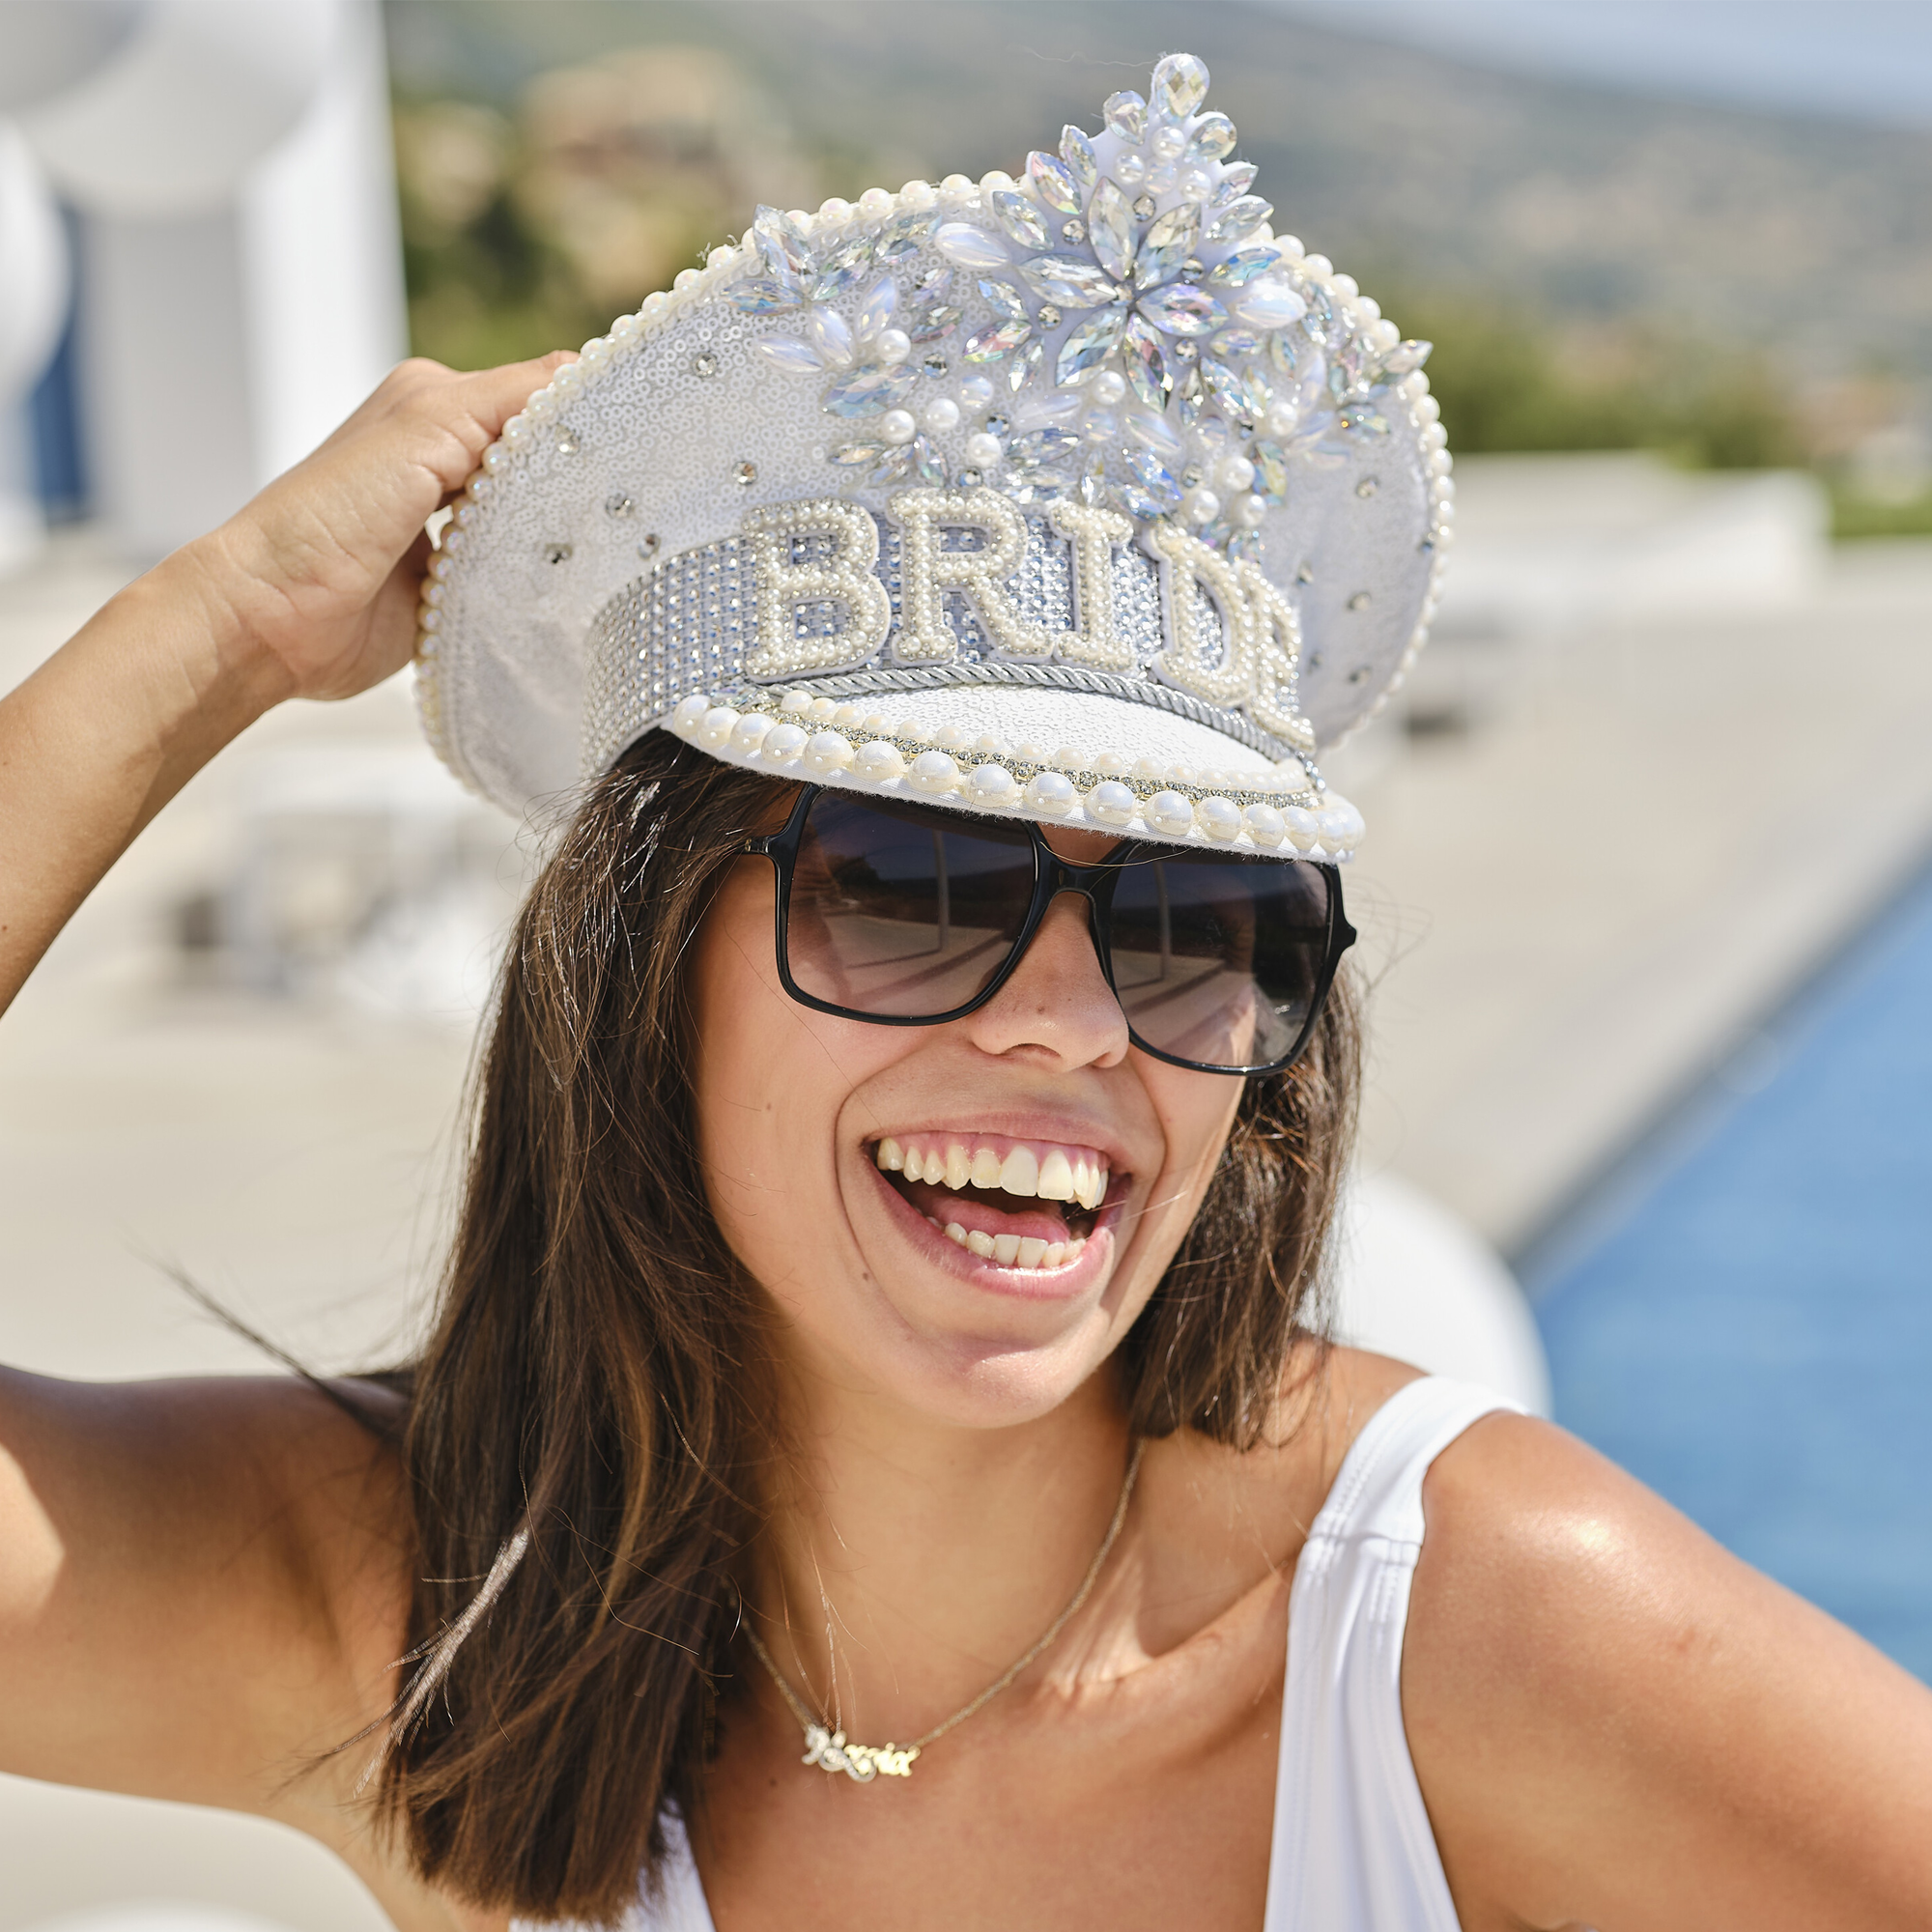 13 Questions to Ask Before You Plan a Hen Party